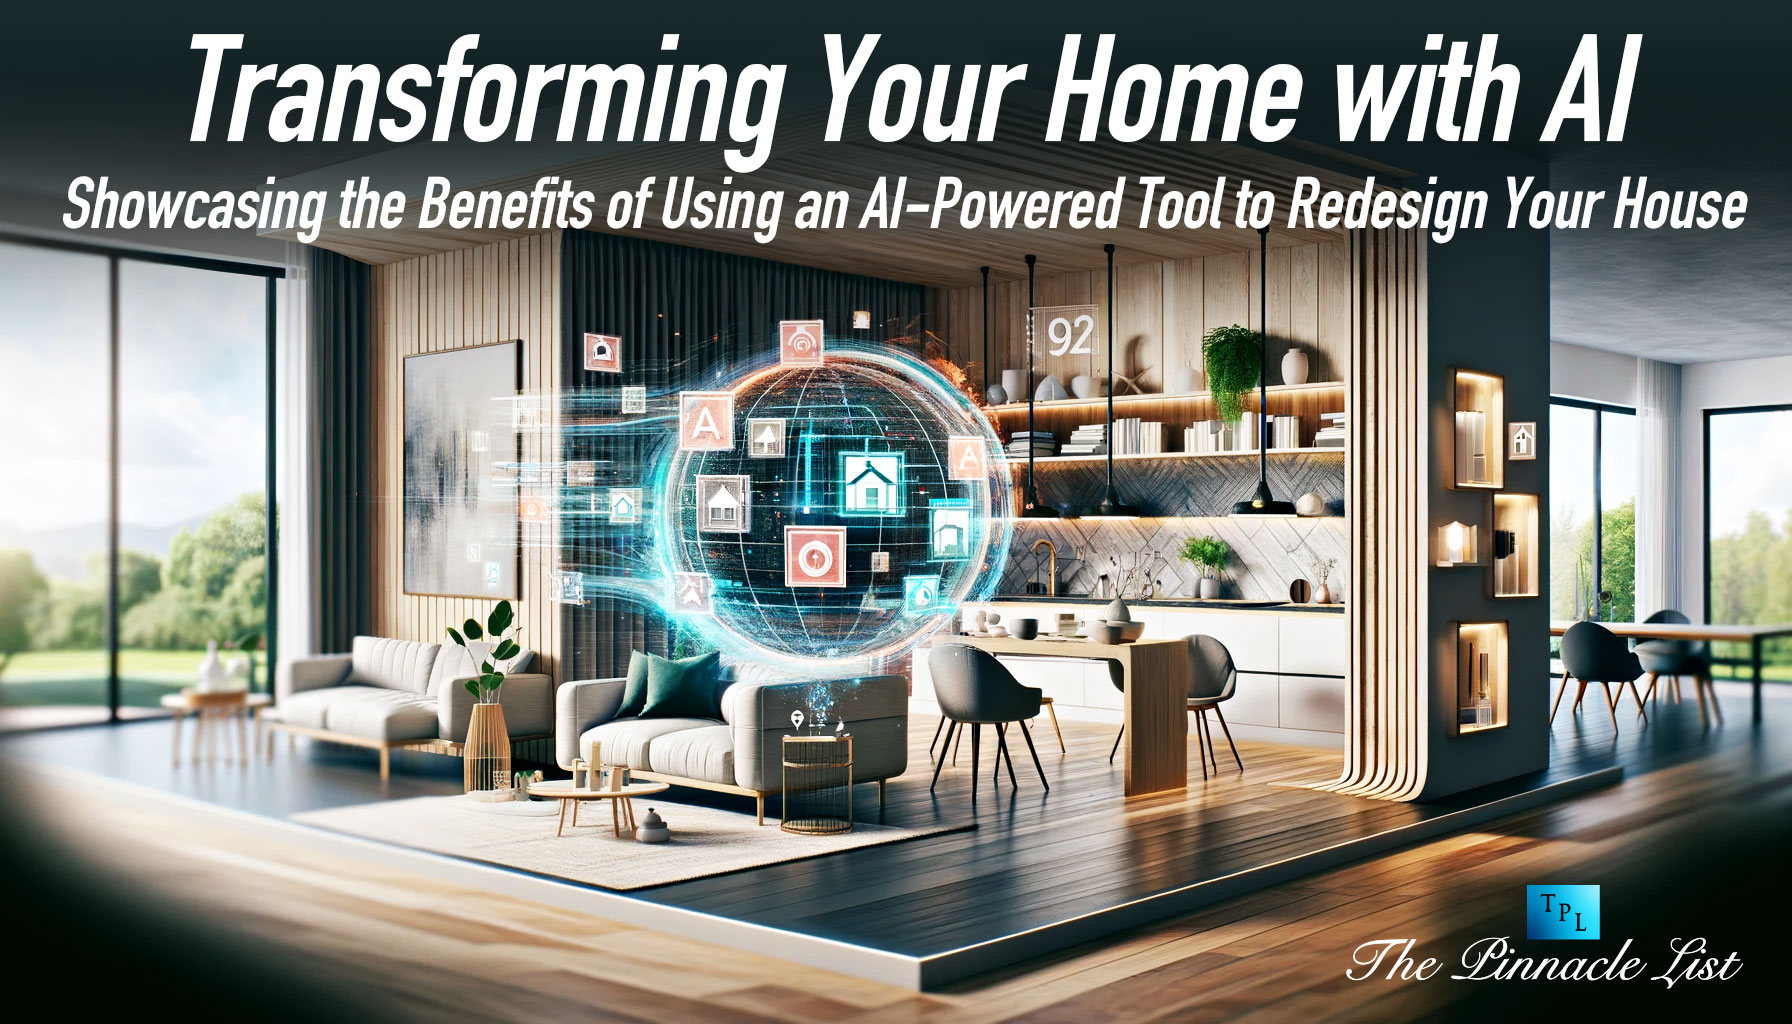 Transforming Your Home with AI: Showcasing the Benefits of Using an AI-Powered Tool to Redesign Your House